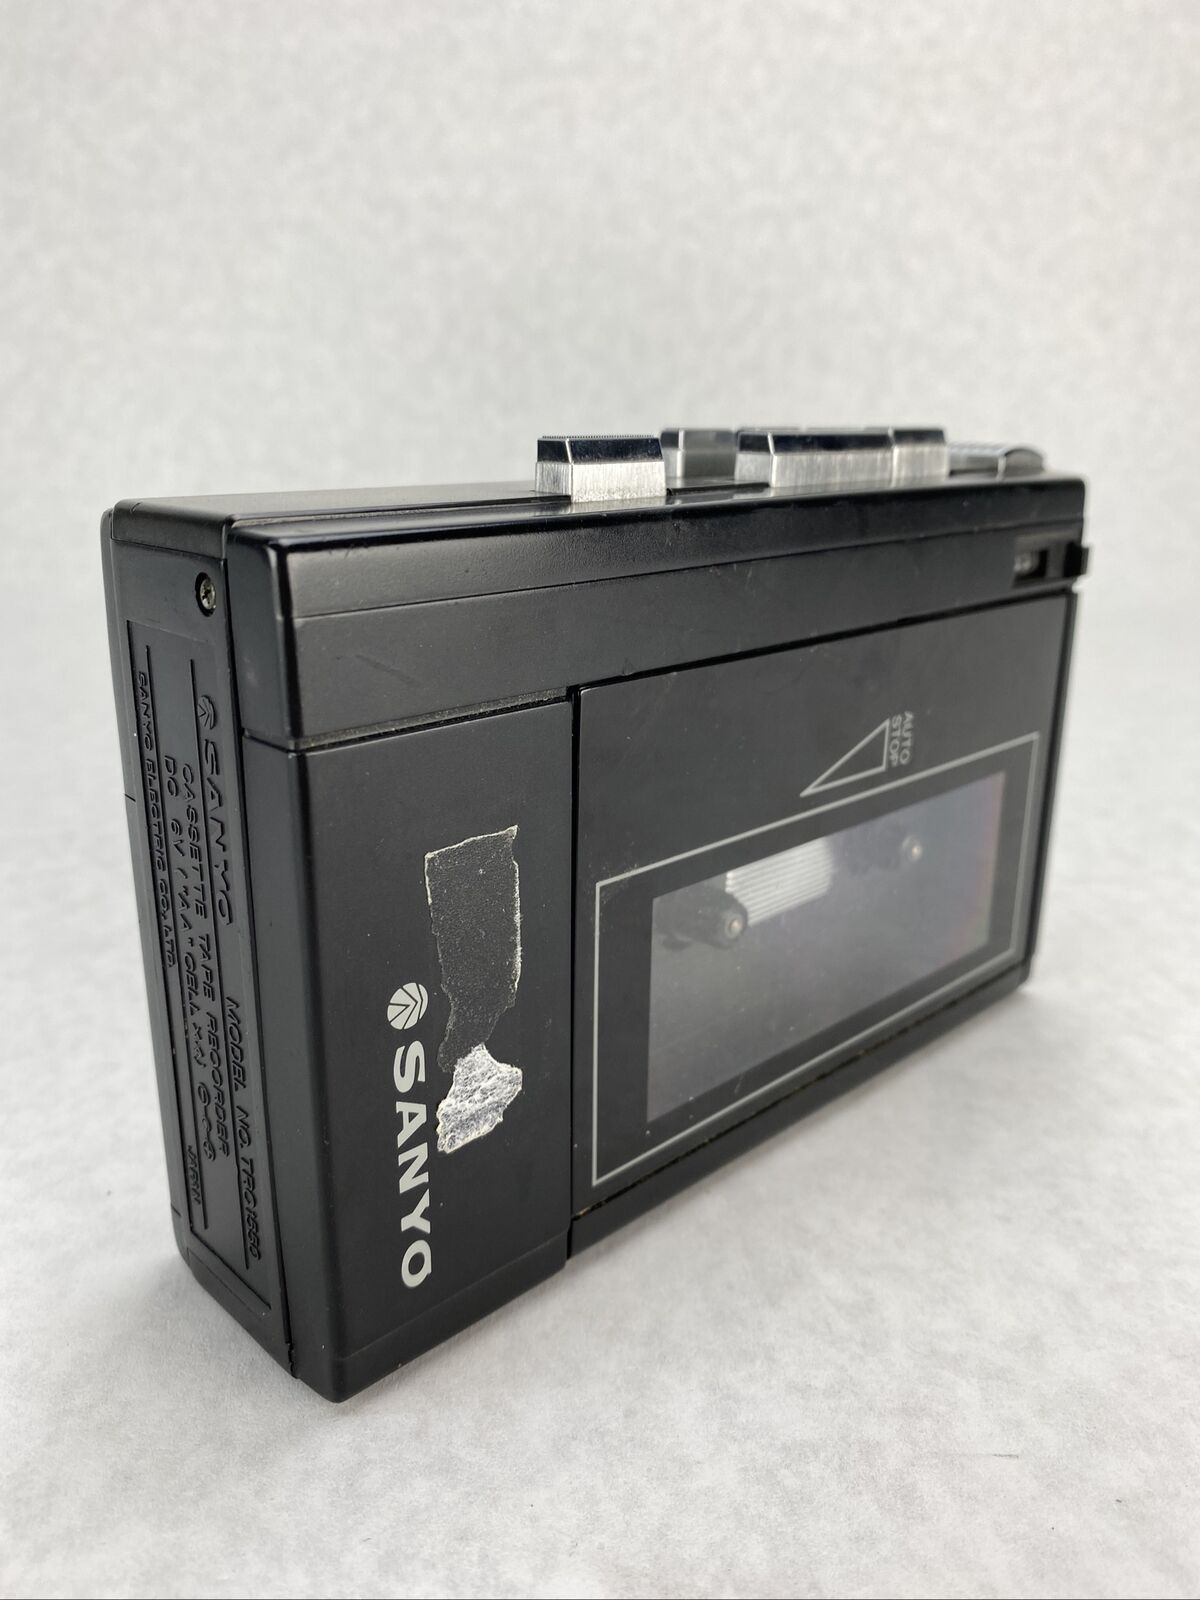 Sanyo TRC-1550 Portable Compact Cassette Recorder WORKS BUT STATIC